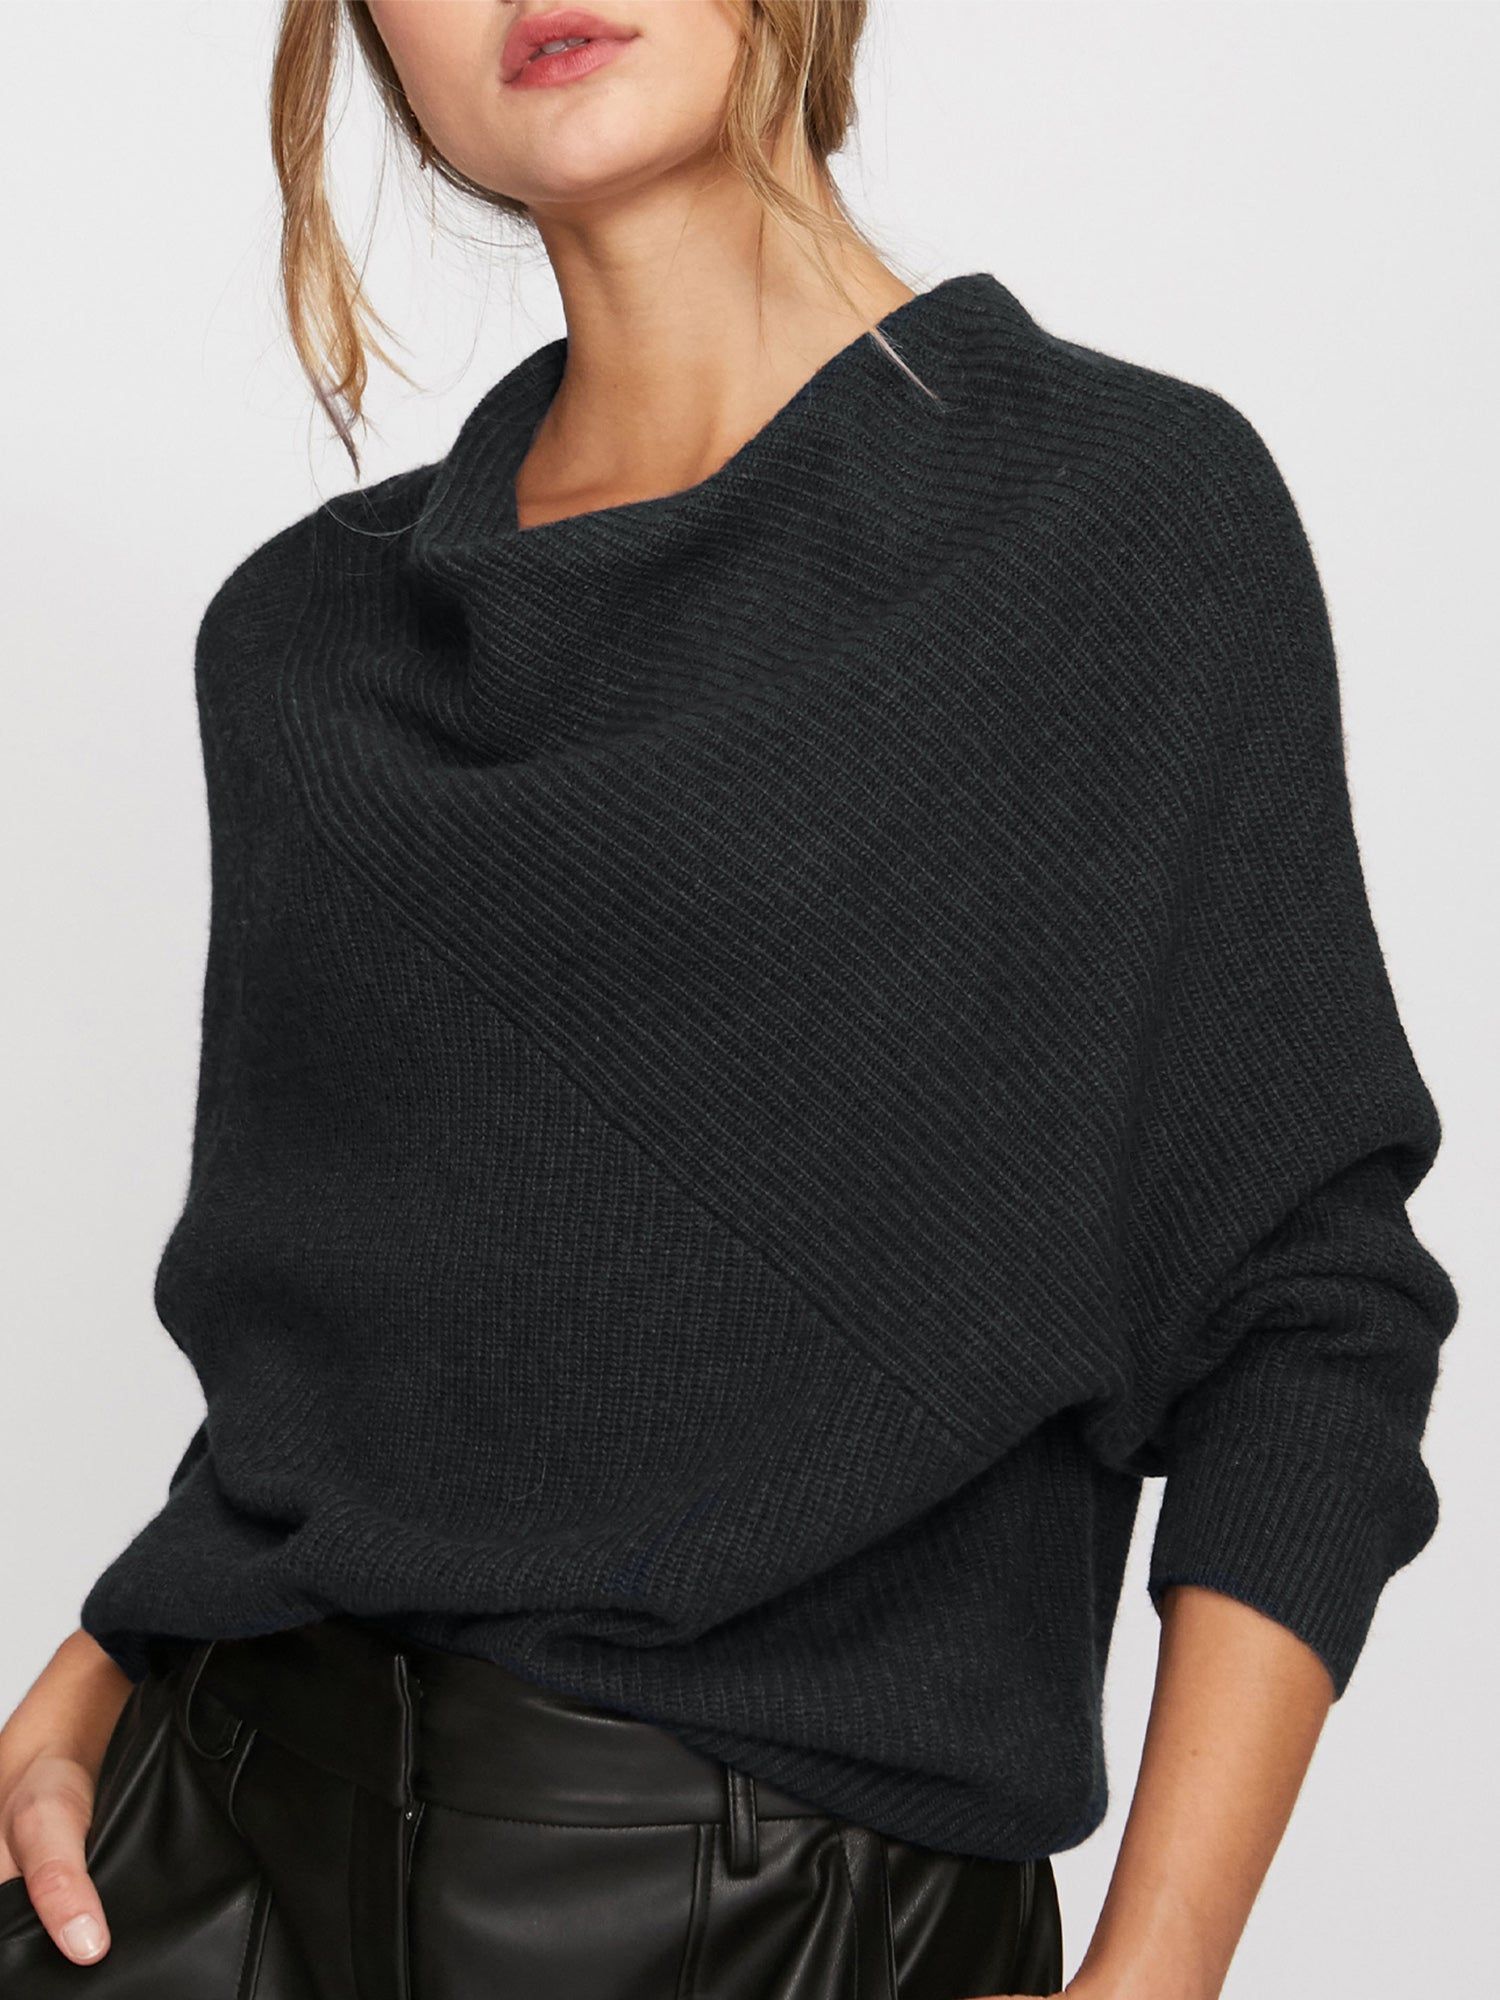 Stay Cozy and Chic: Cowl Neck Sweaters
Styling Ideas